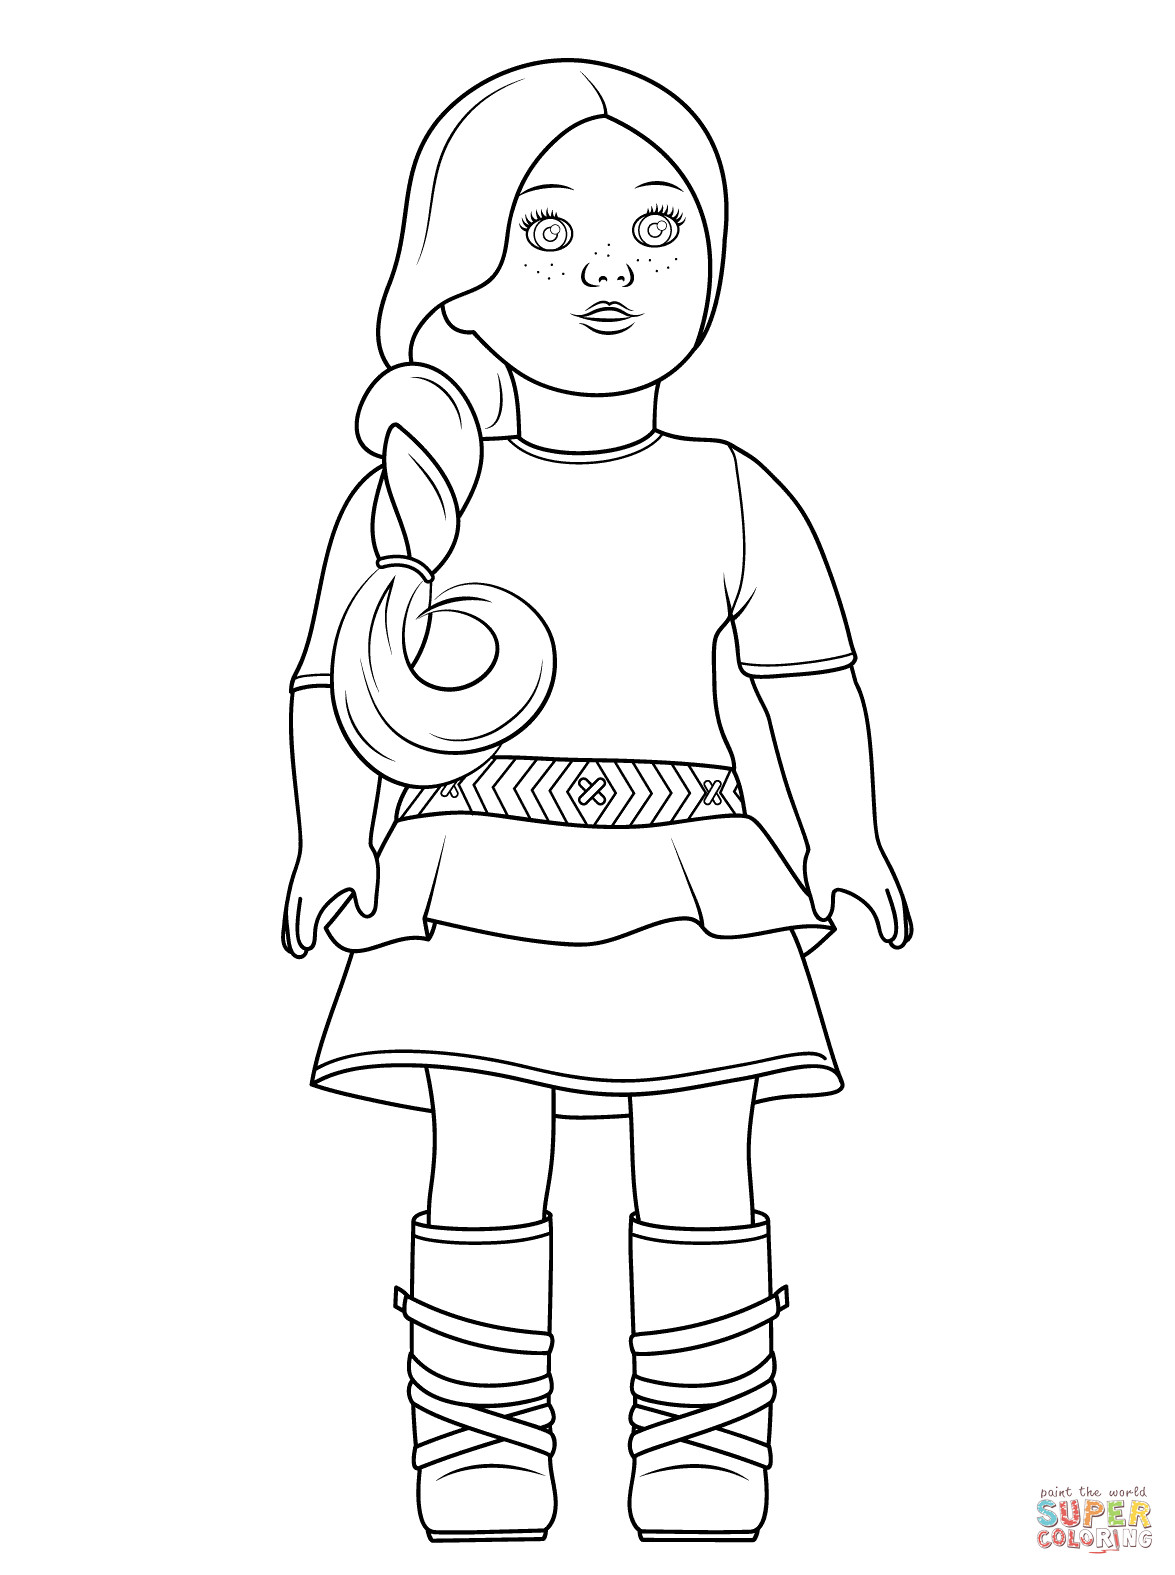 American Girl Doll Isabelle Coloring Pages
 American Girl Saige coloring page